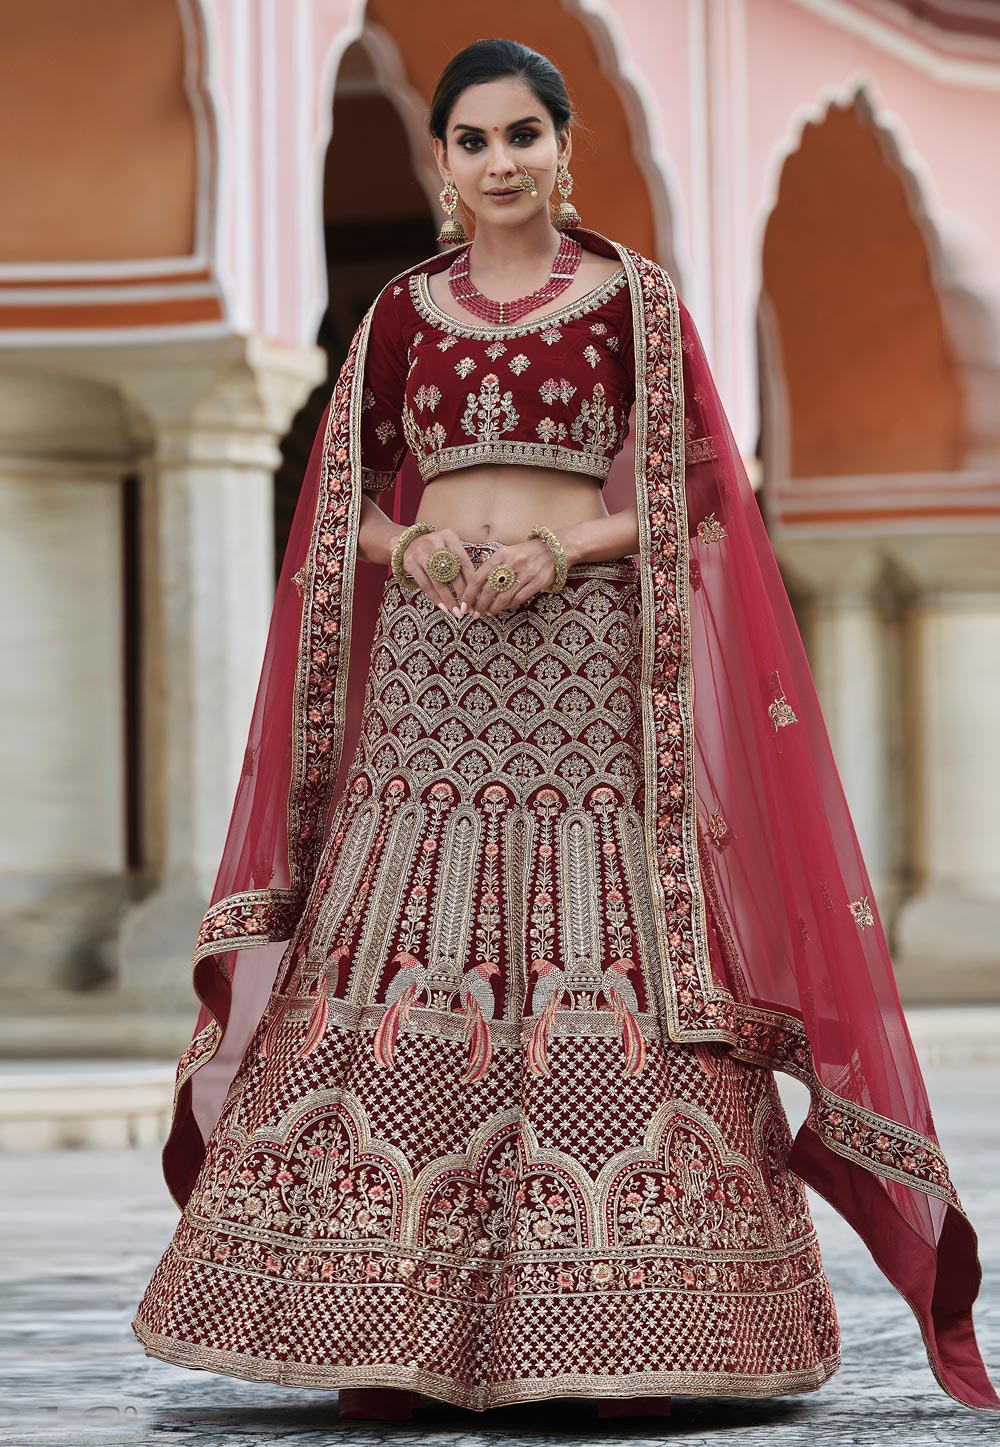 10+ Red Bridal Lehengas 2022 that will Make You Wish You Were Getting  Married Tomorrow | Bridal Look | Wedding Blog